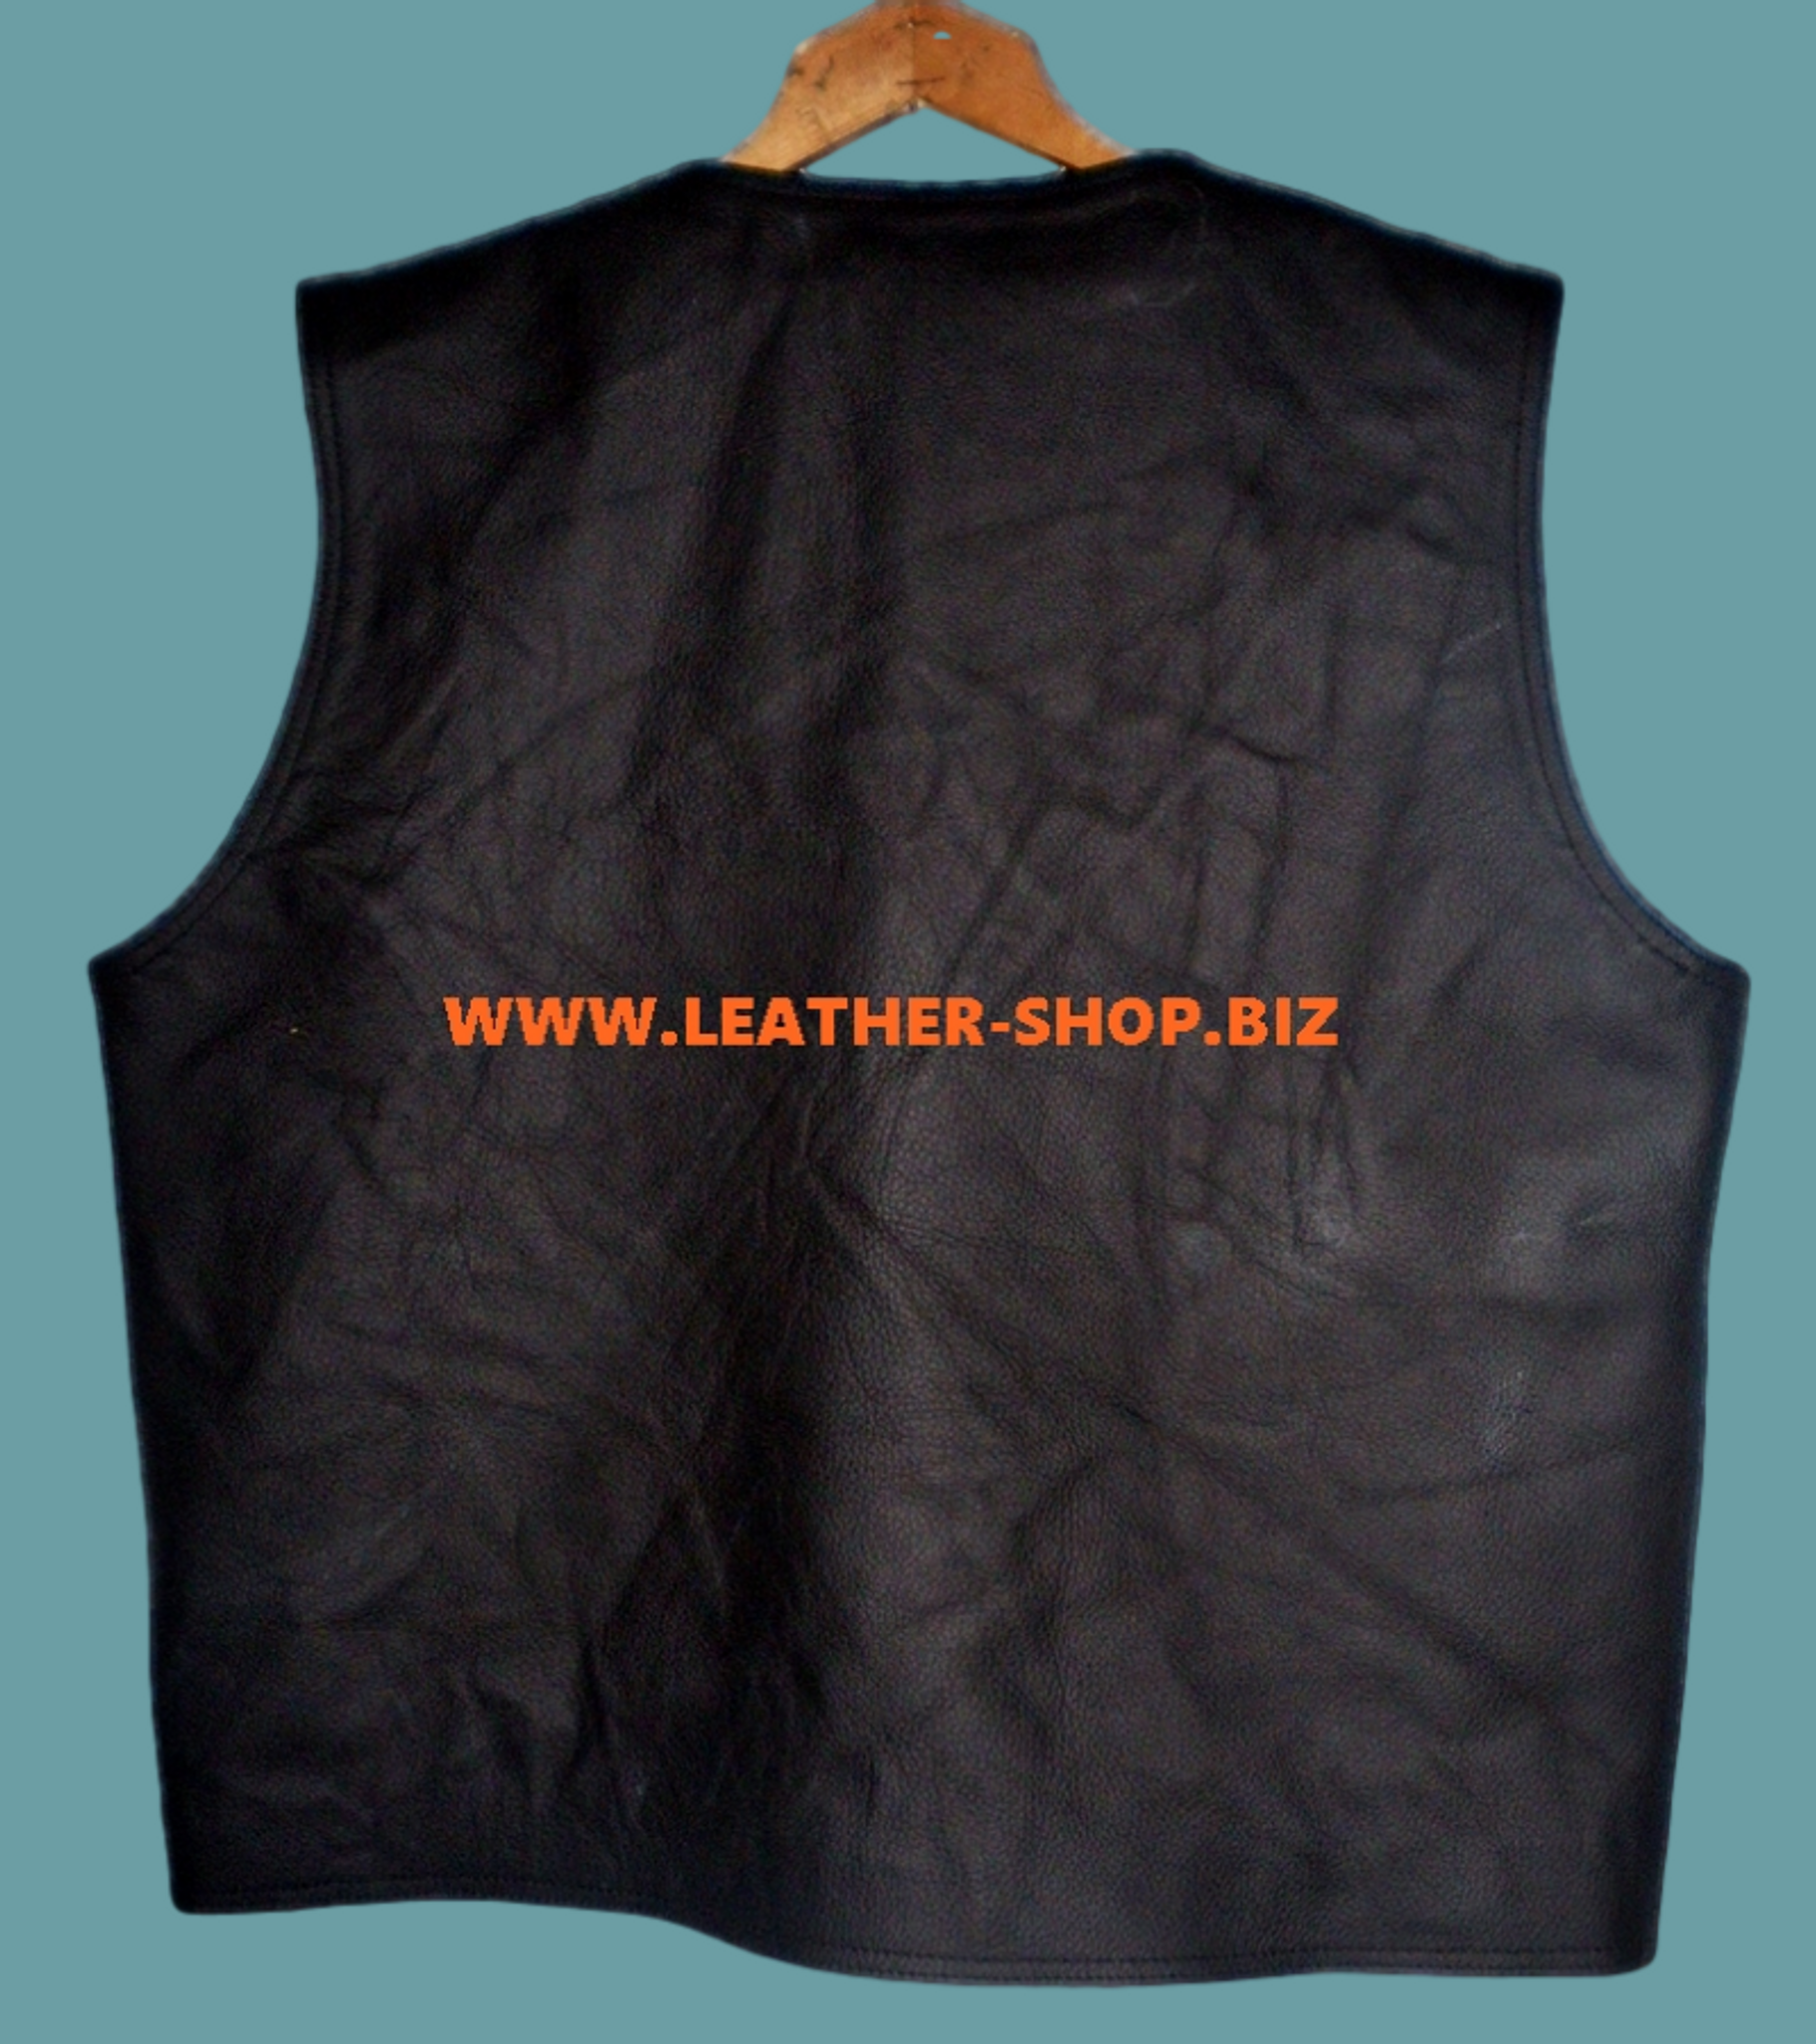 Mens Leather Vest Style MLV097 available in 8 colors.